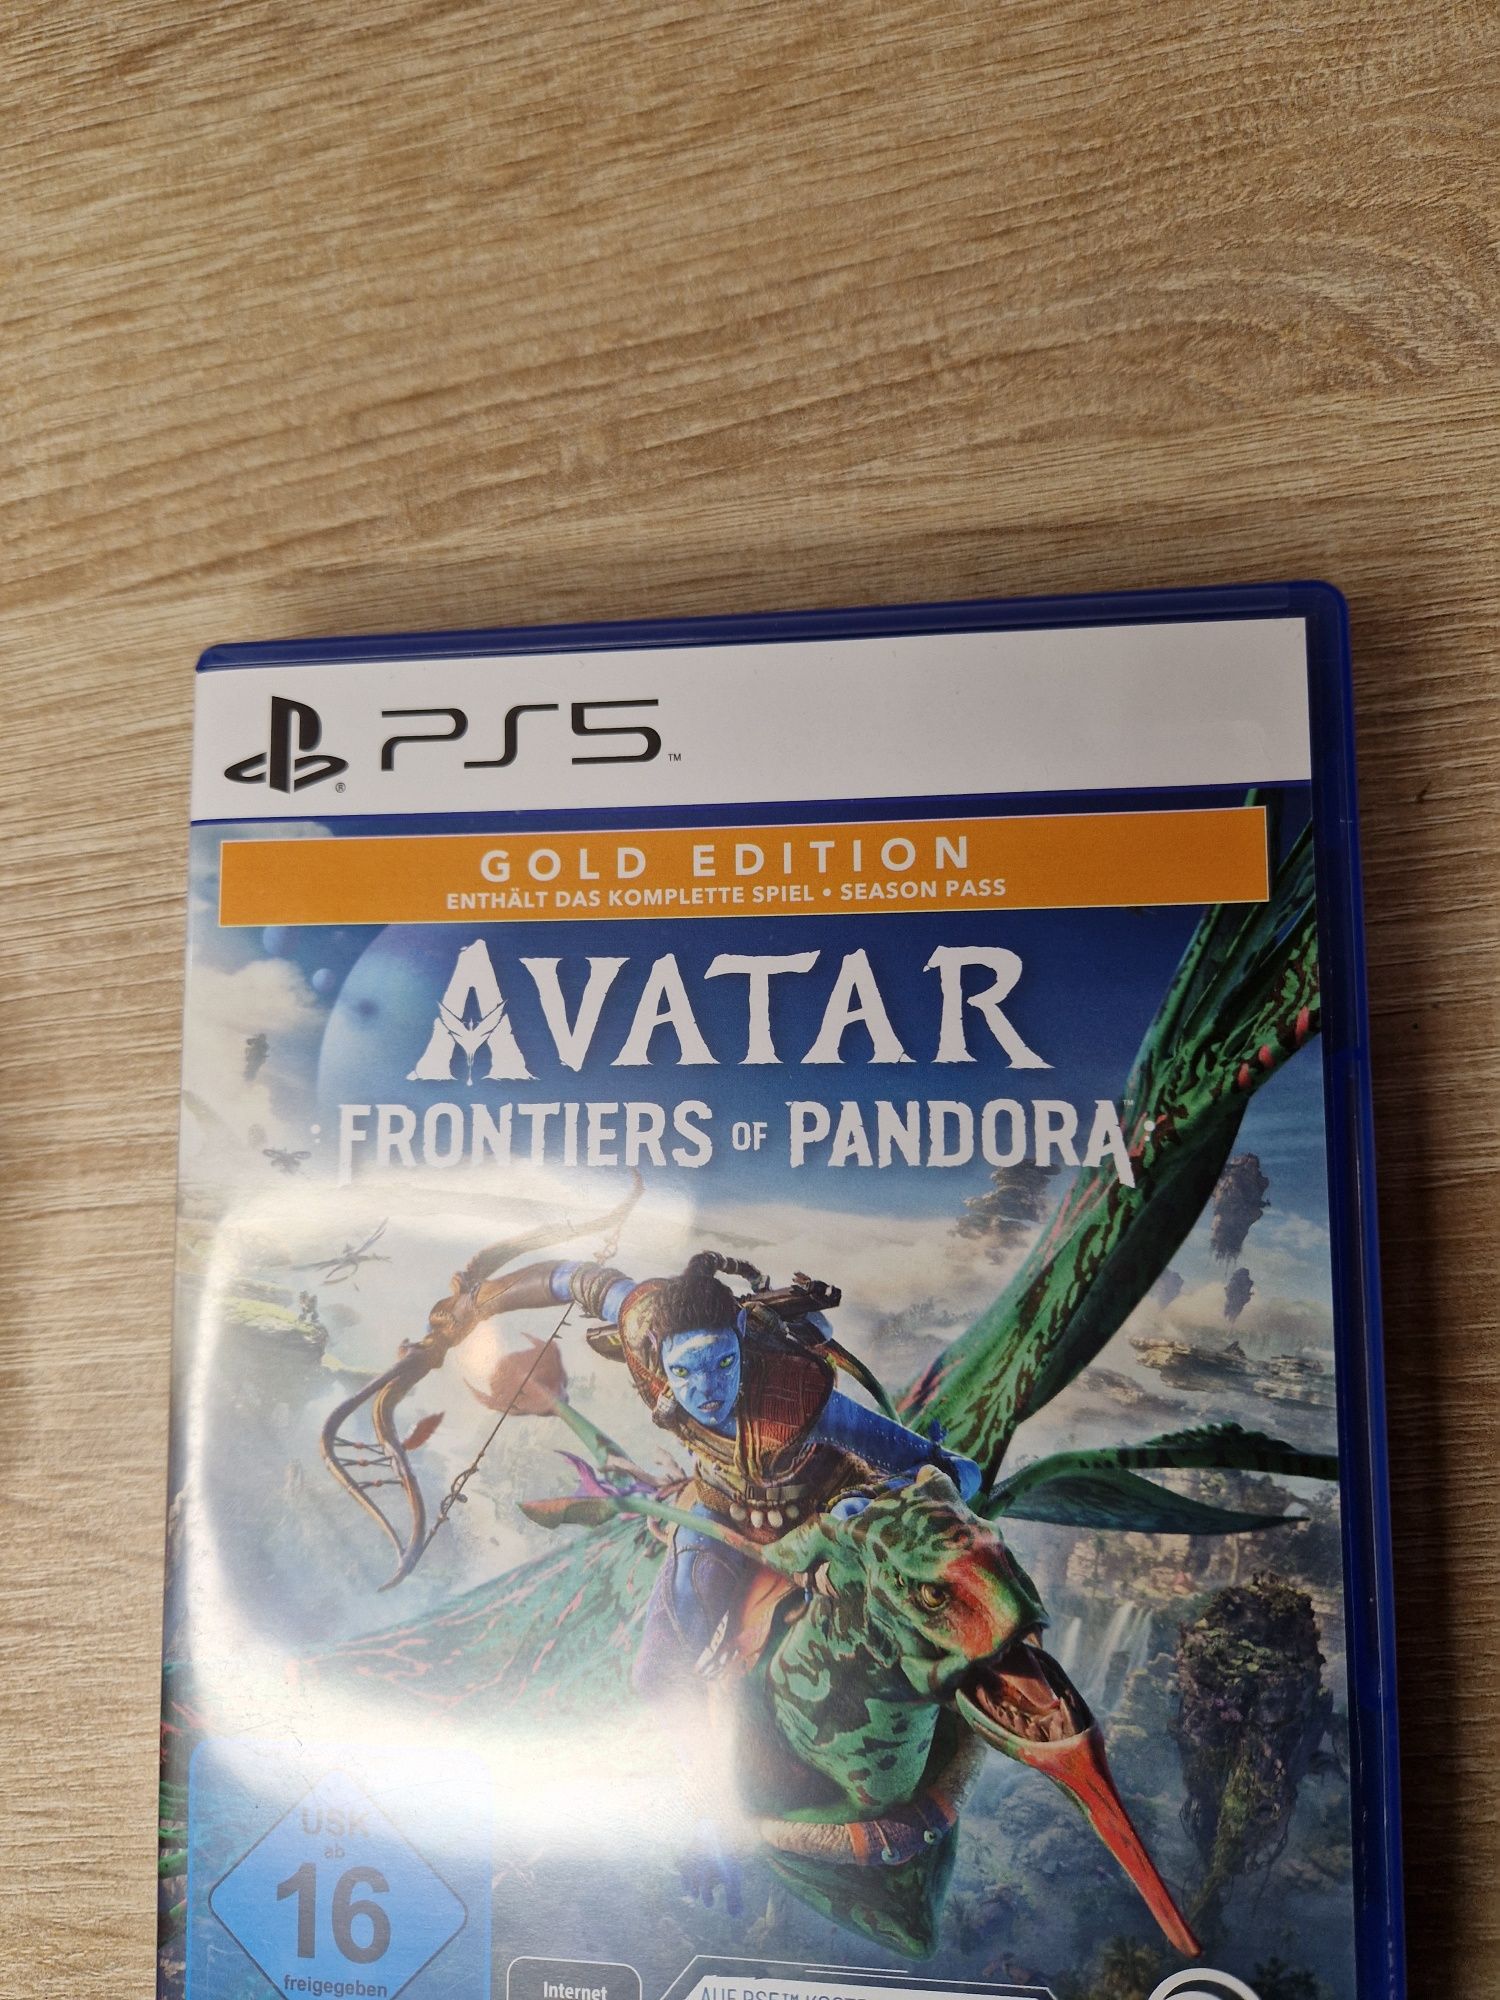 Avatar frontiers of pandora Gold edition